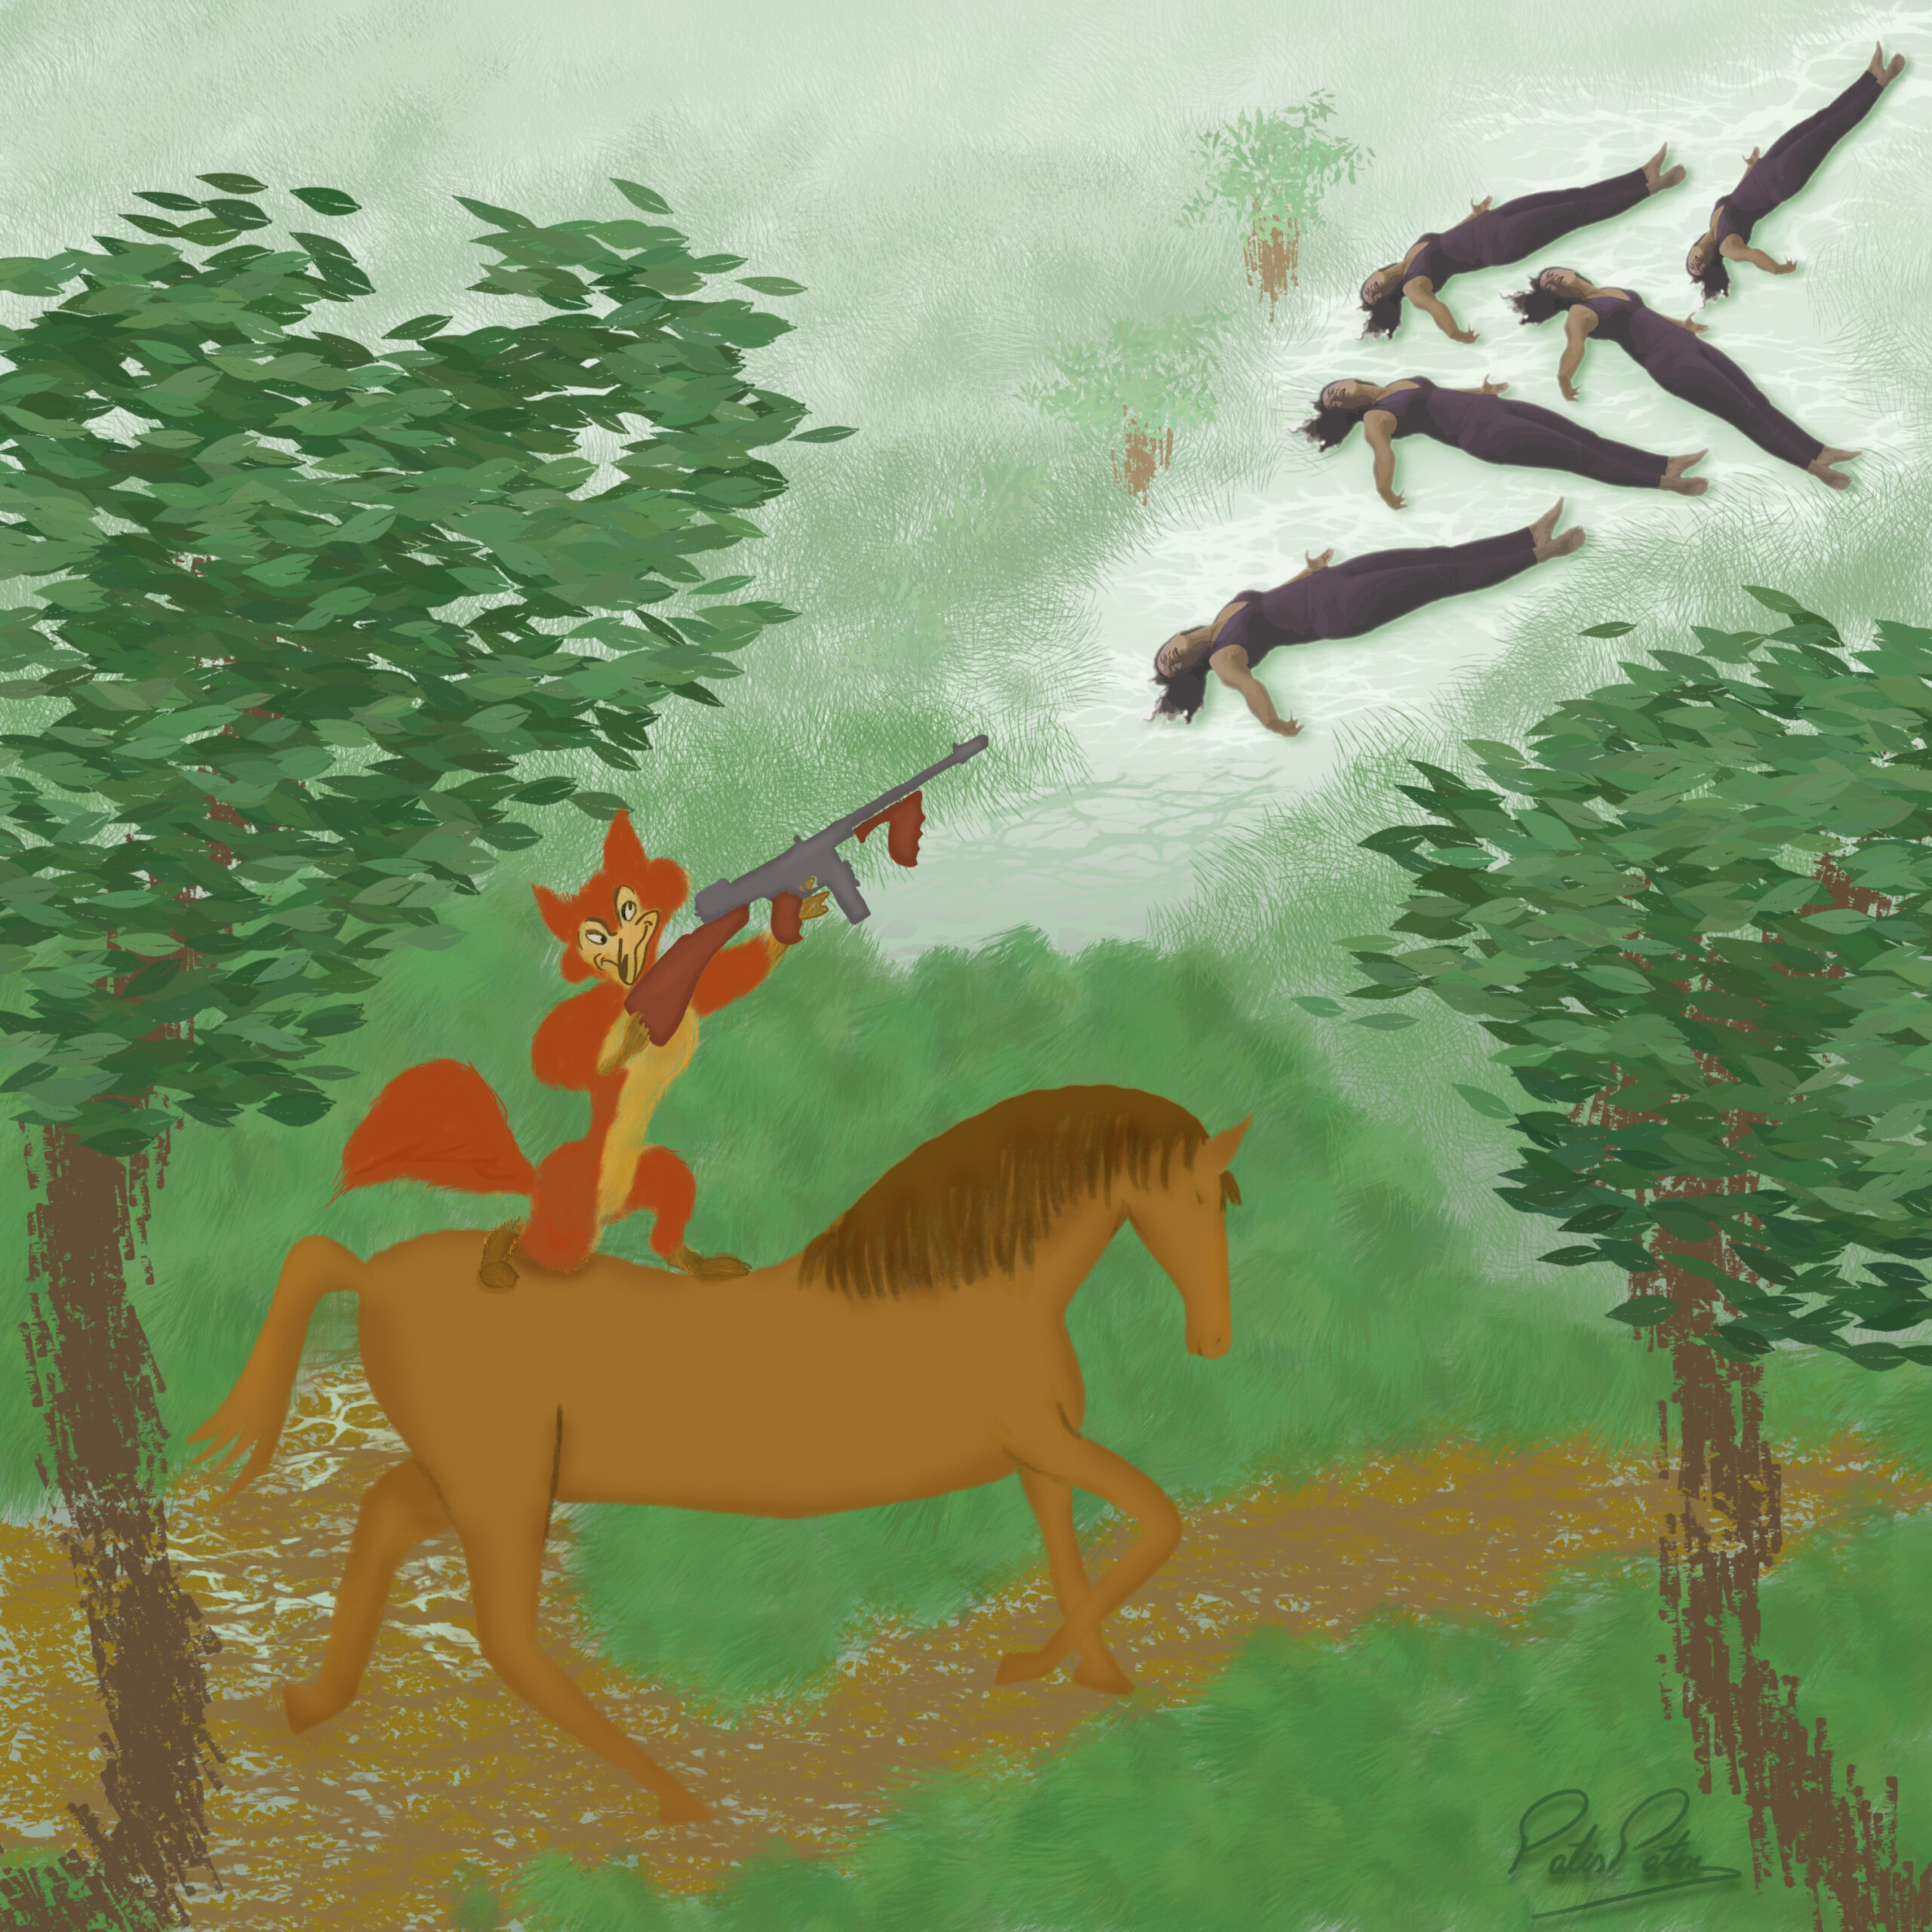 Illustration of a fox on top of a horse hunting human beings.